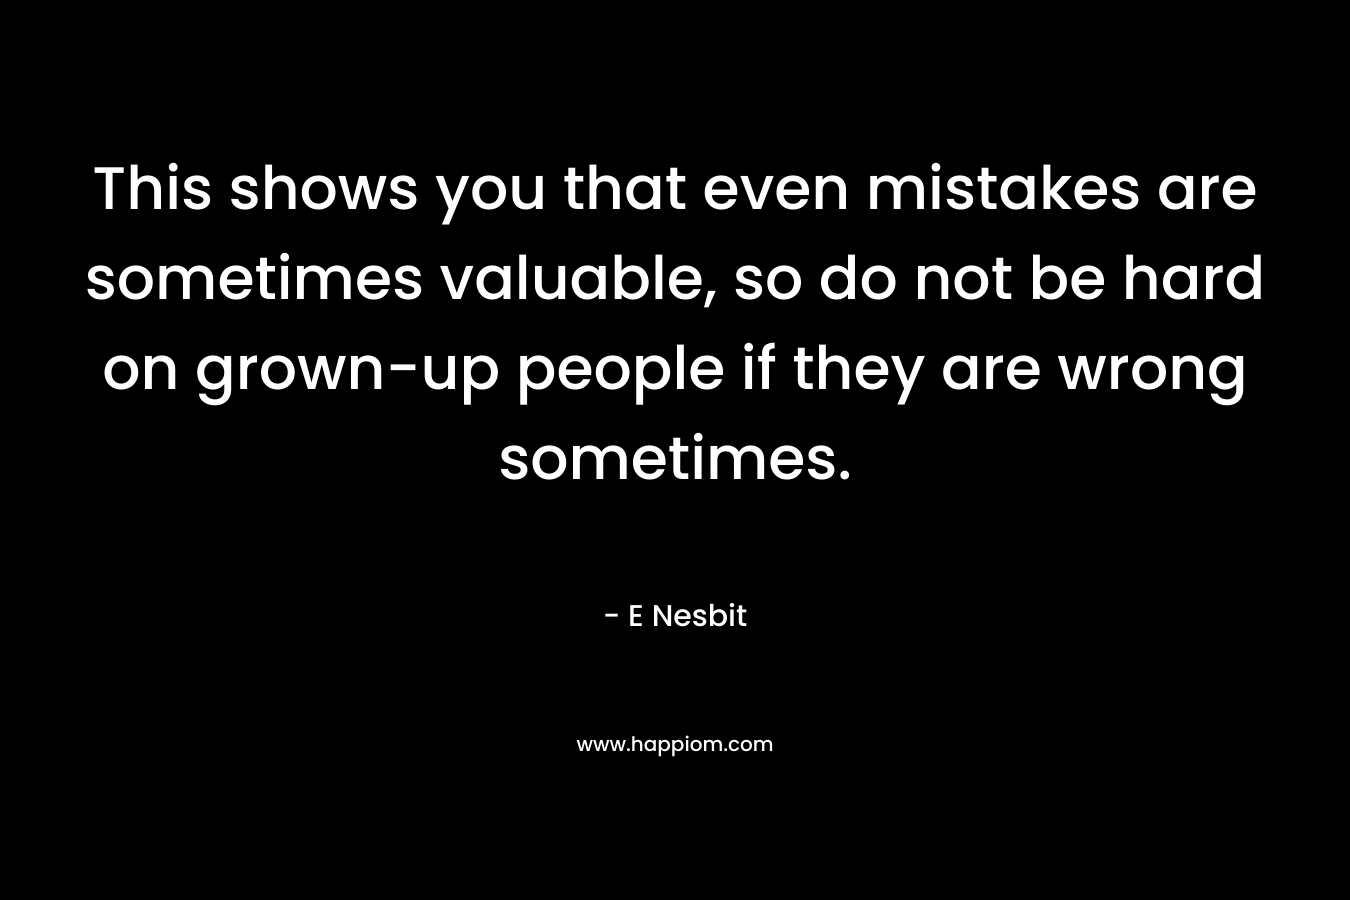 This shows you that even mistakes are sometimes valuable, so do not be hard on grown-up people if they are wrong sometimes. – E Nesbit